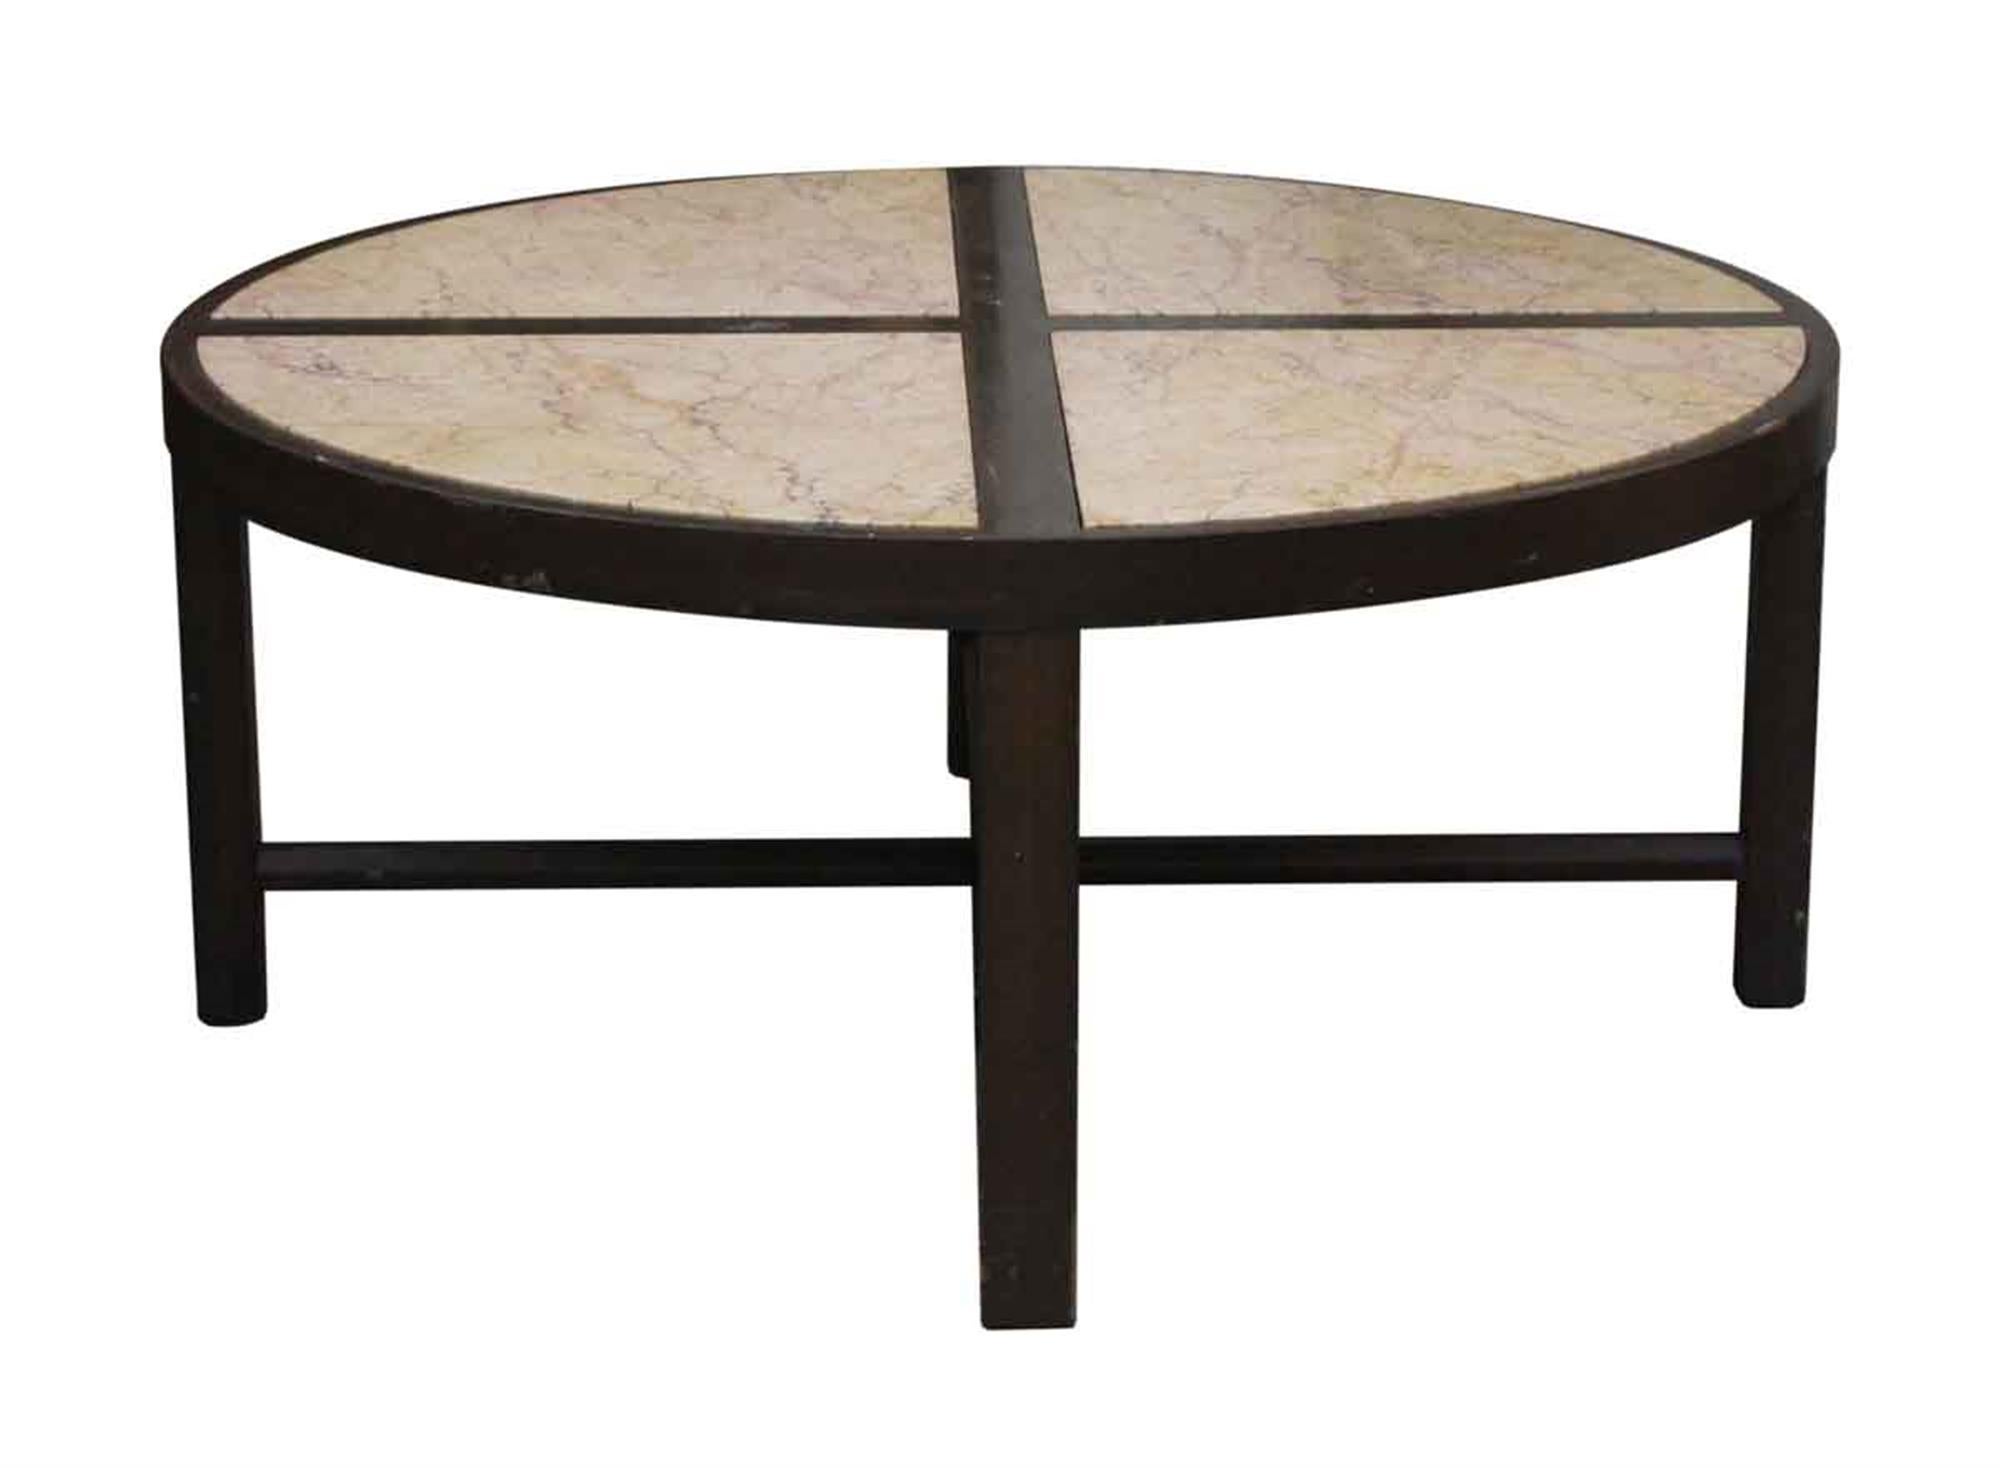 American 1950s Mid-Century Modern Four Section Marble Top and Dark Tone Wood Coffee Table